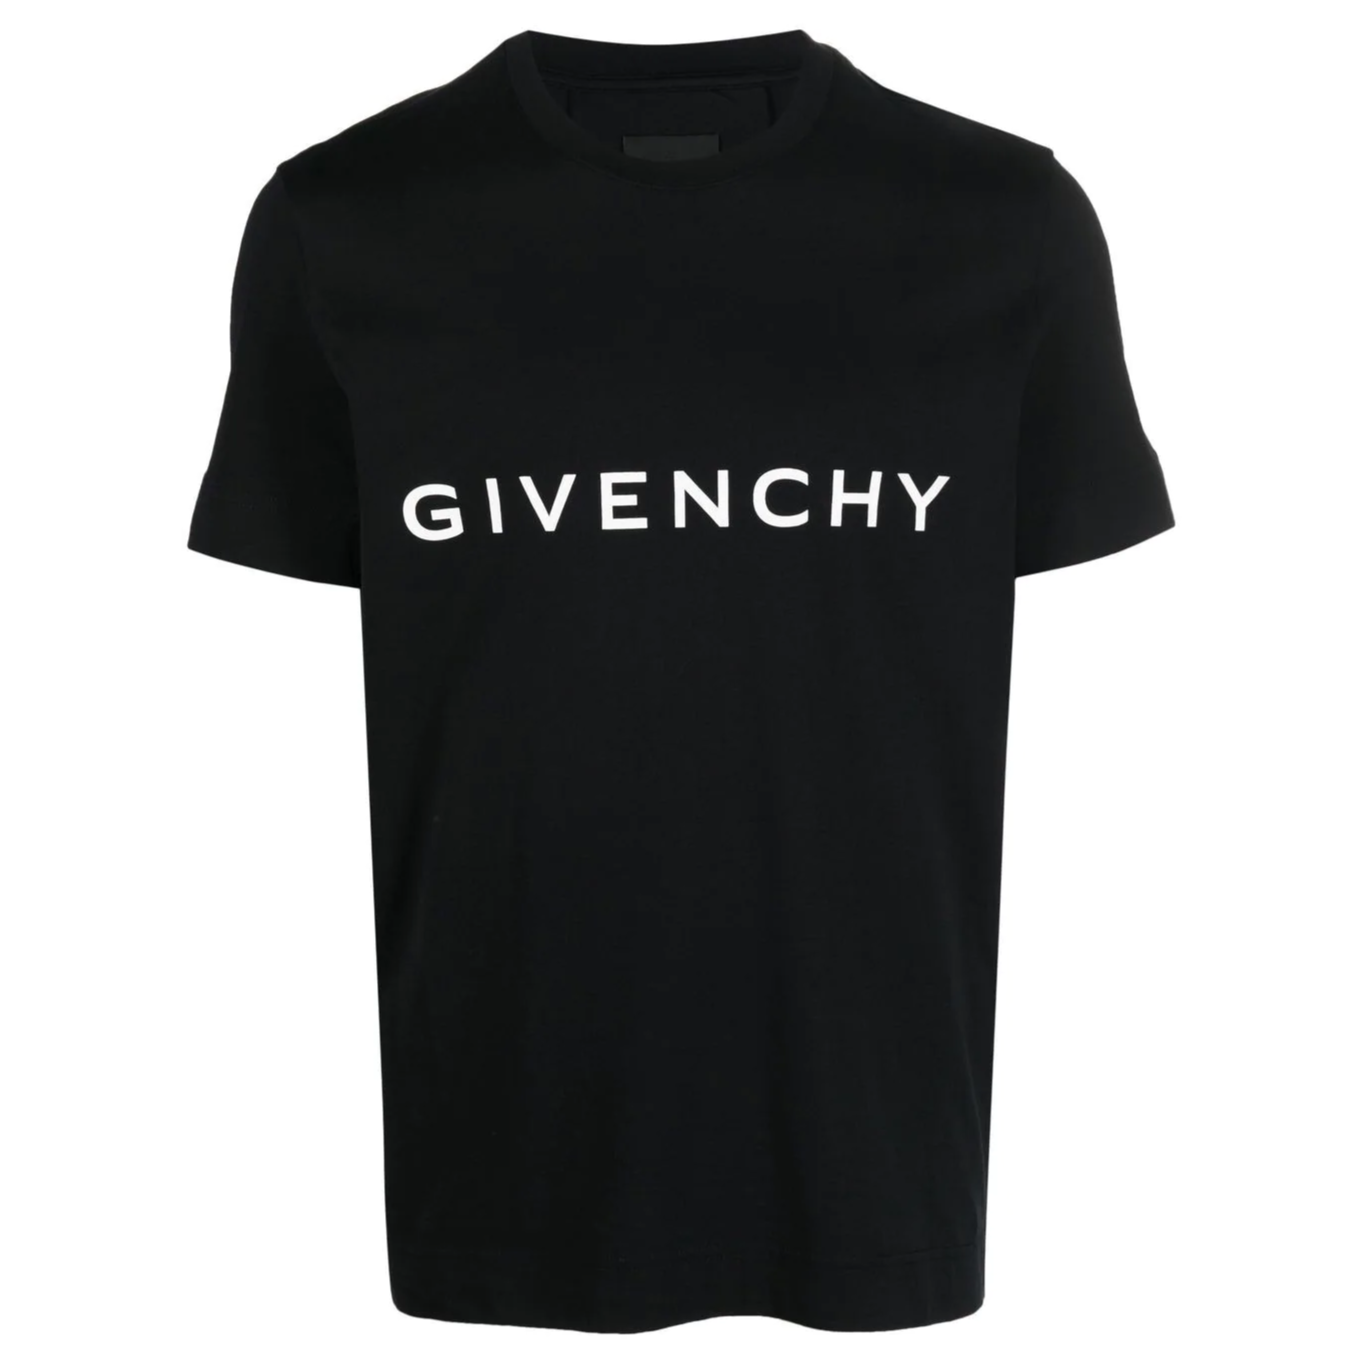 Total 97+ imagen new givenchy t shirt